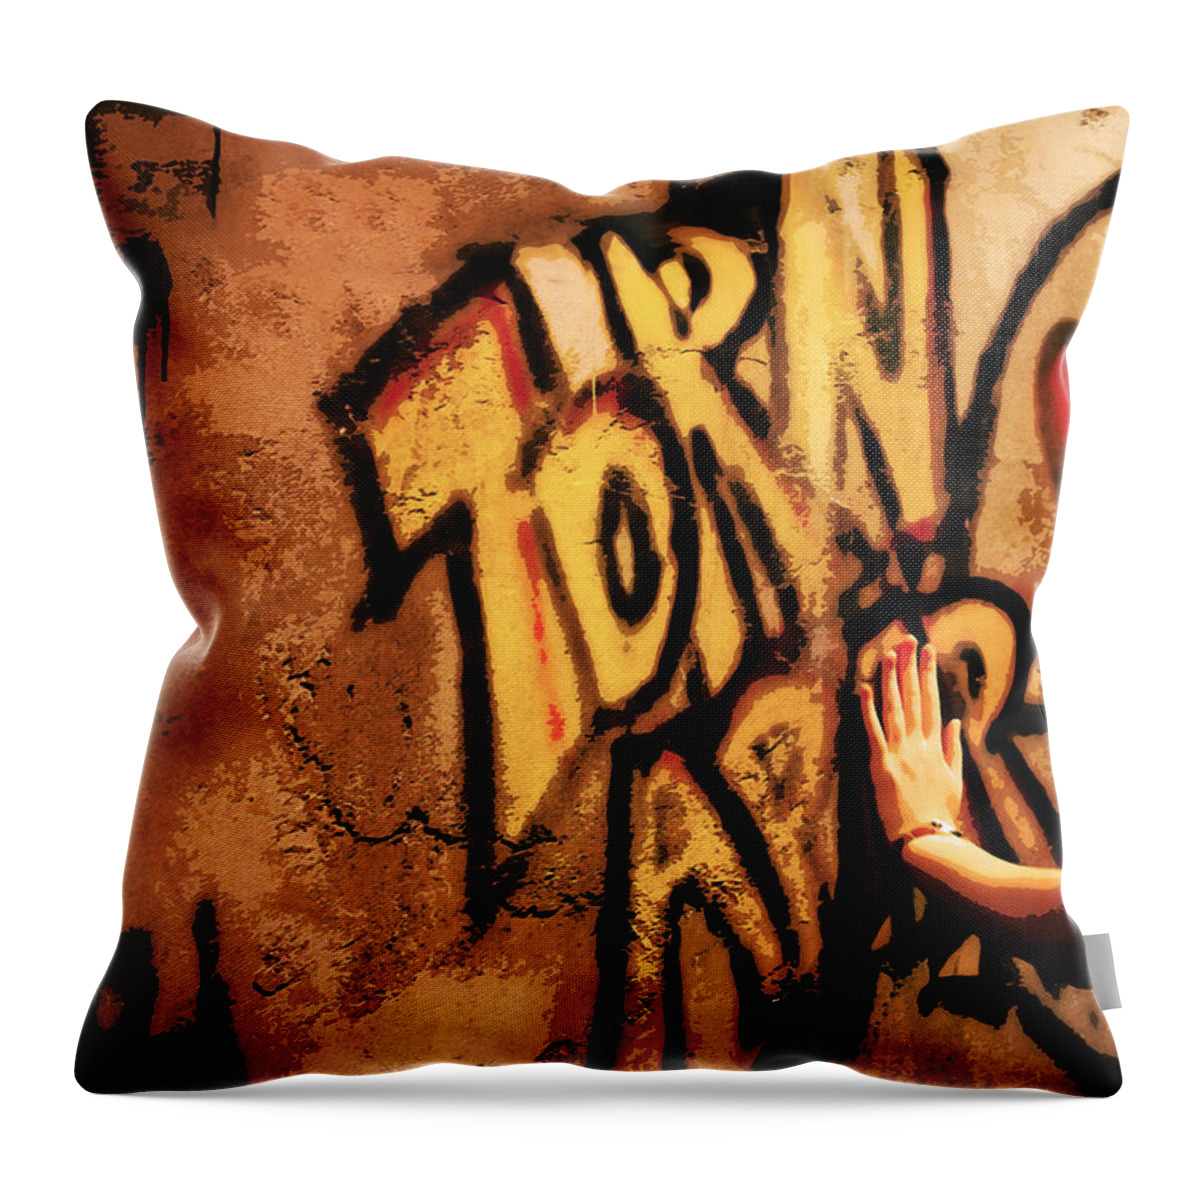 Berlin Throw Pillow featuring the photograph Tear This Wall Down by Susan Vineyard